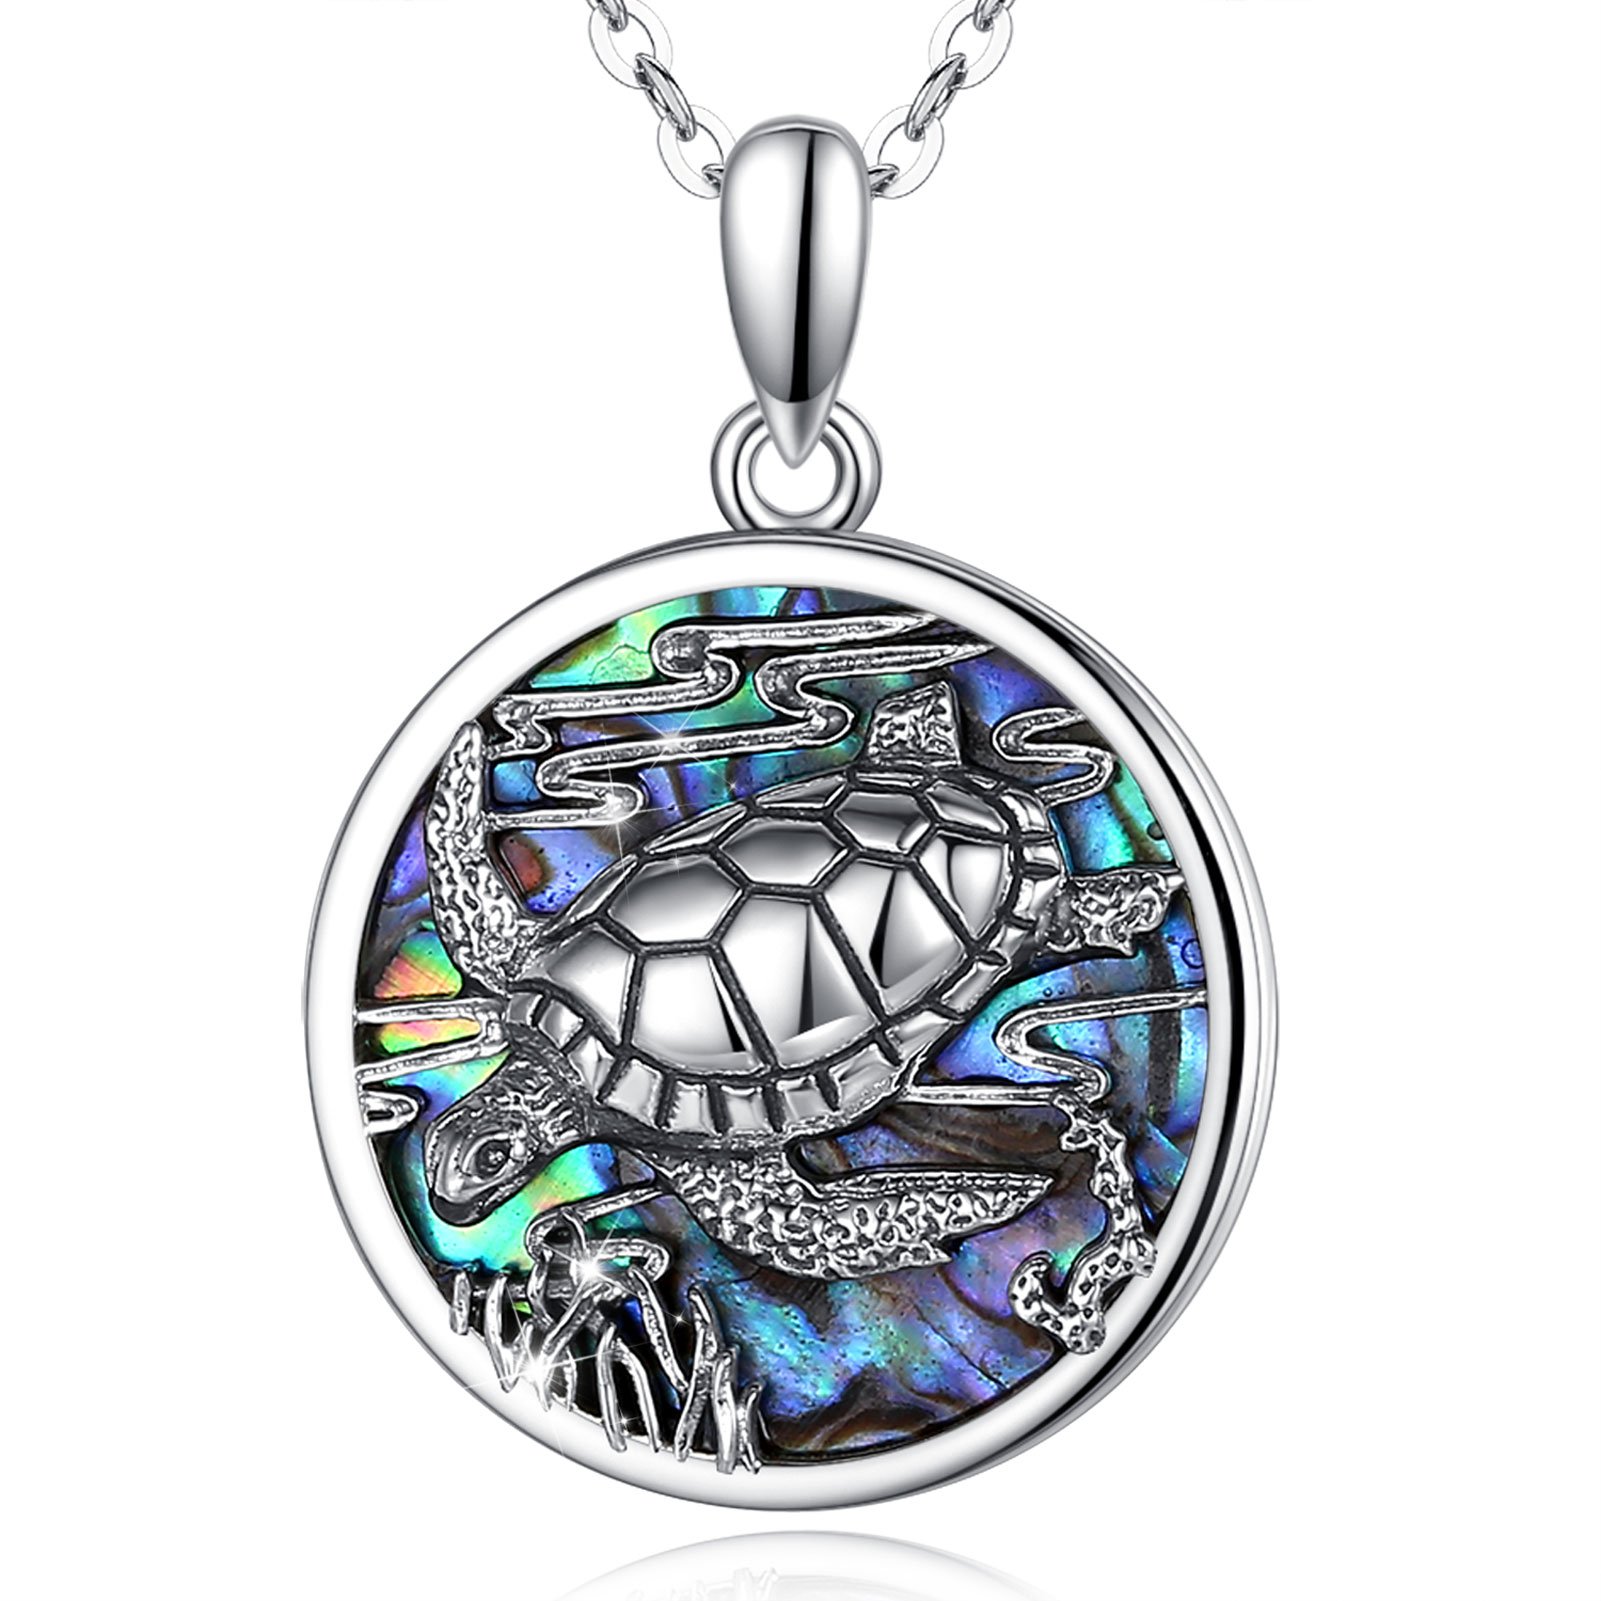 Merryshine Jewelry S925 Sterling Silver Mother of Pearl Abalone Shell Sea Turtle Necklace